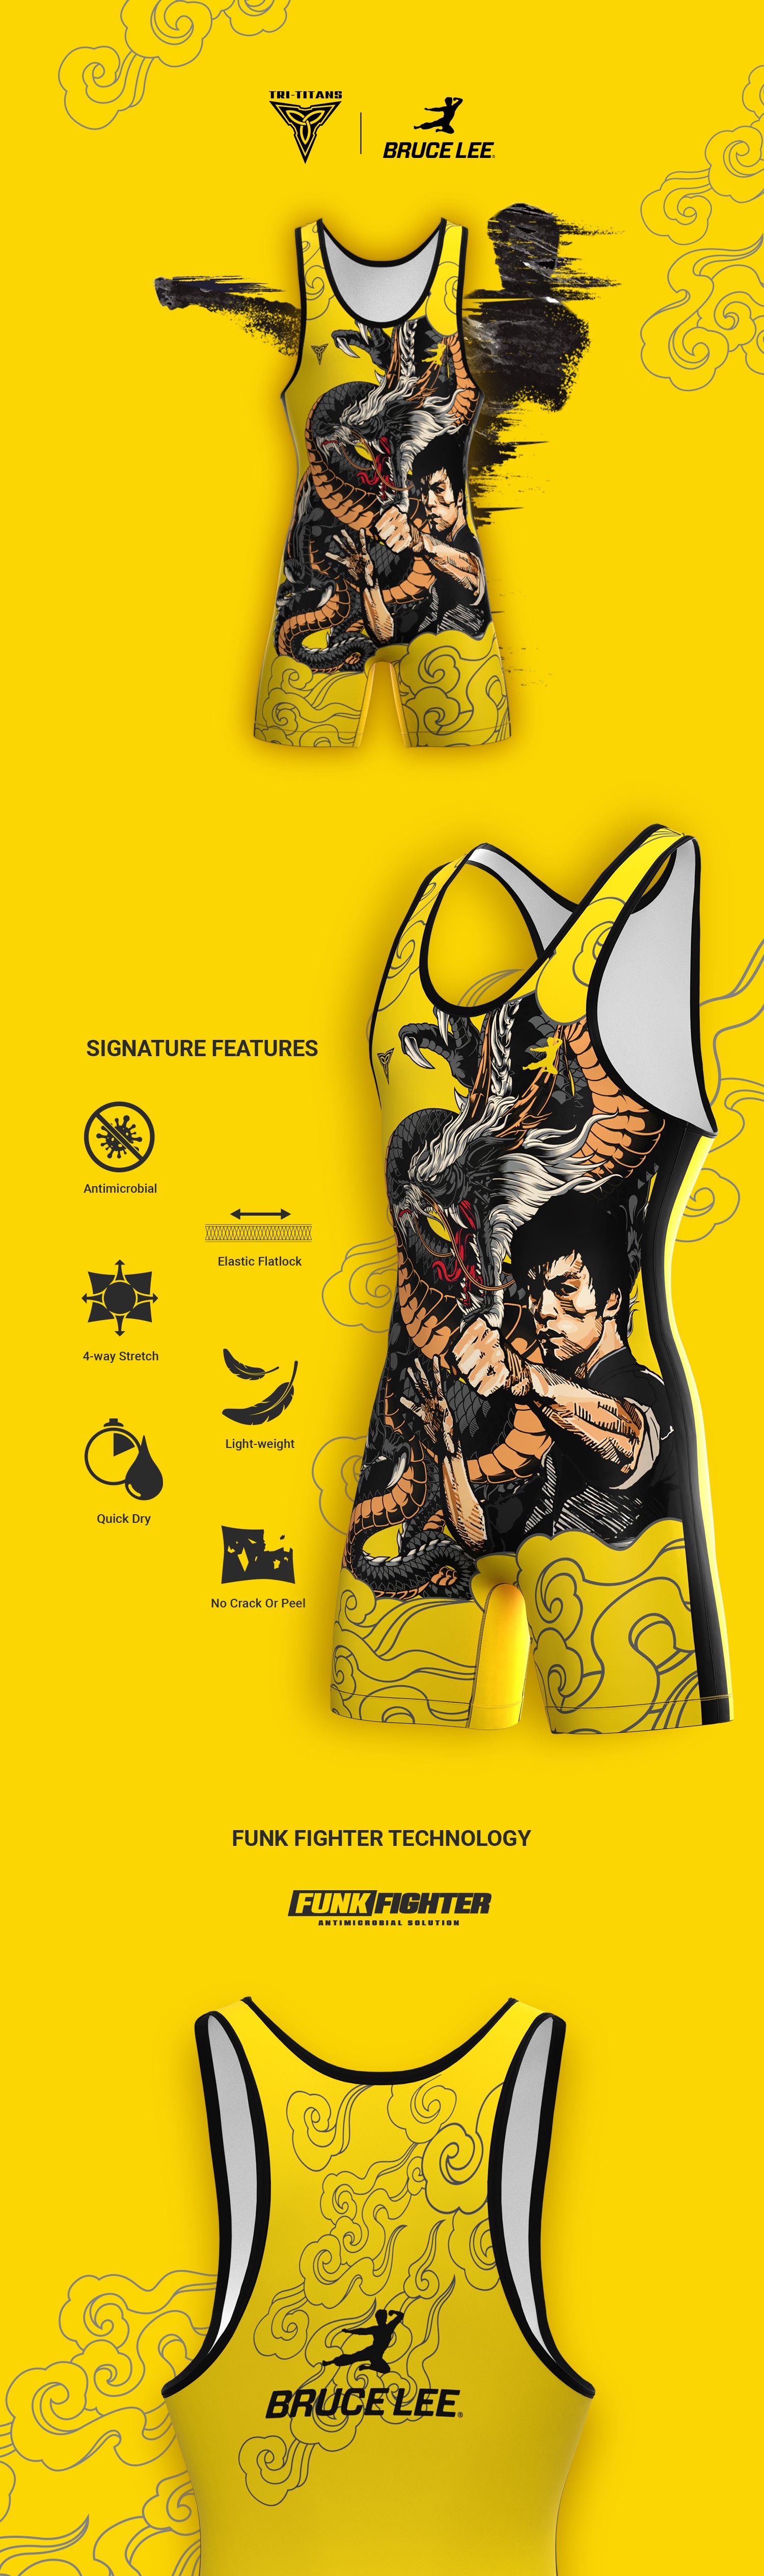 <p>He’s the pinnacle of what a human being can achieve with relentless will and discipline.</p> <p>Regardless of generation, culture, or gender… We all want to be like the Little Dragon.</p> <p>That’s why we’re proud to announce our official Bruce Lee line with the release of our Bruce Lee Singlet.</p>